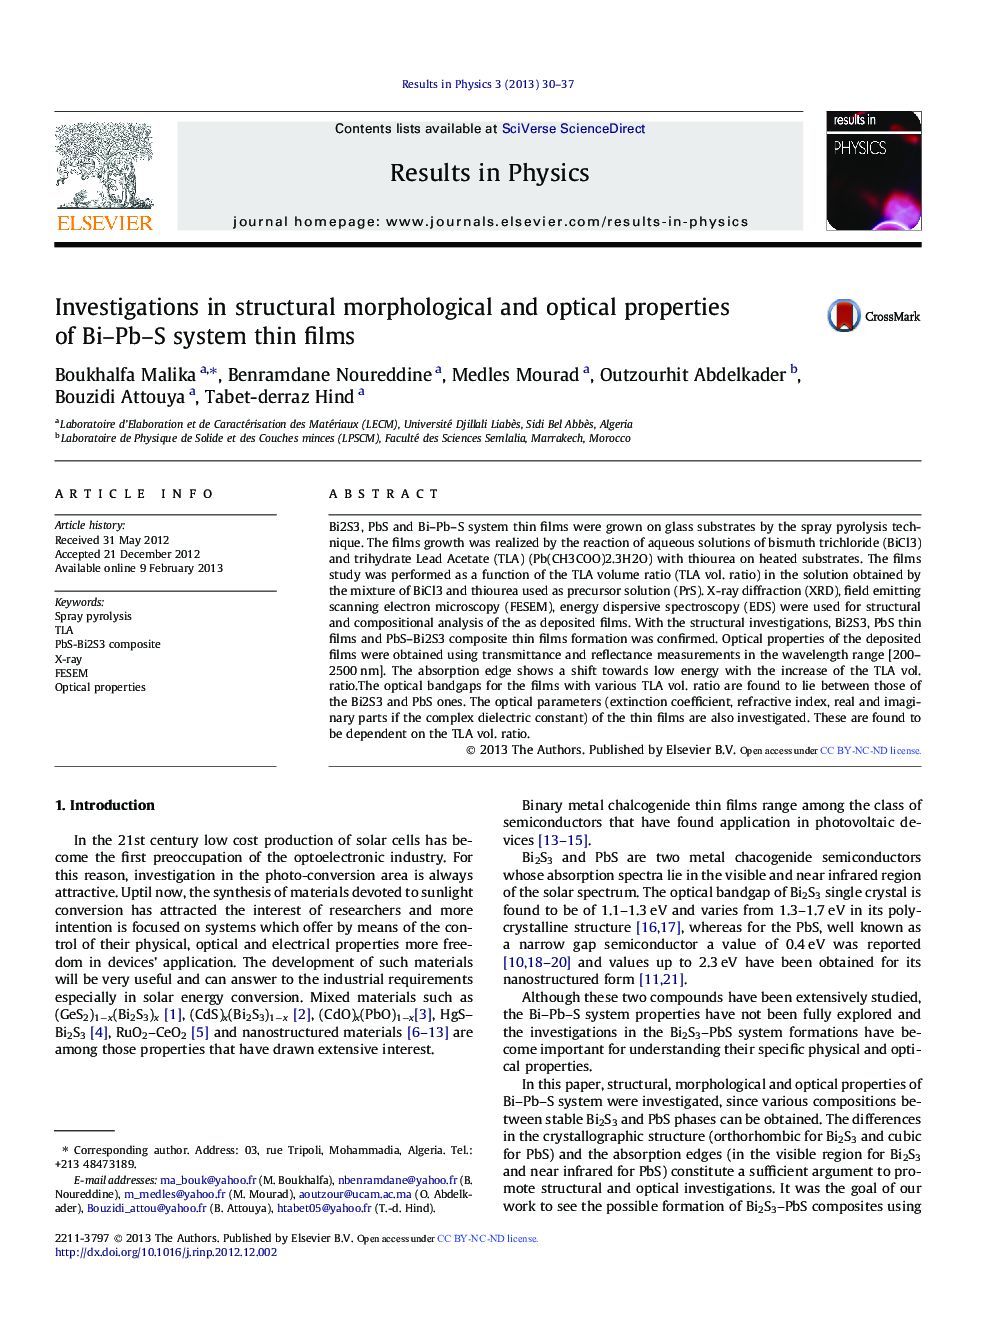 Investigations in structural morphological and optical properties of Bi-Pb-S system thin films